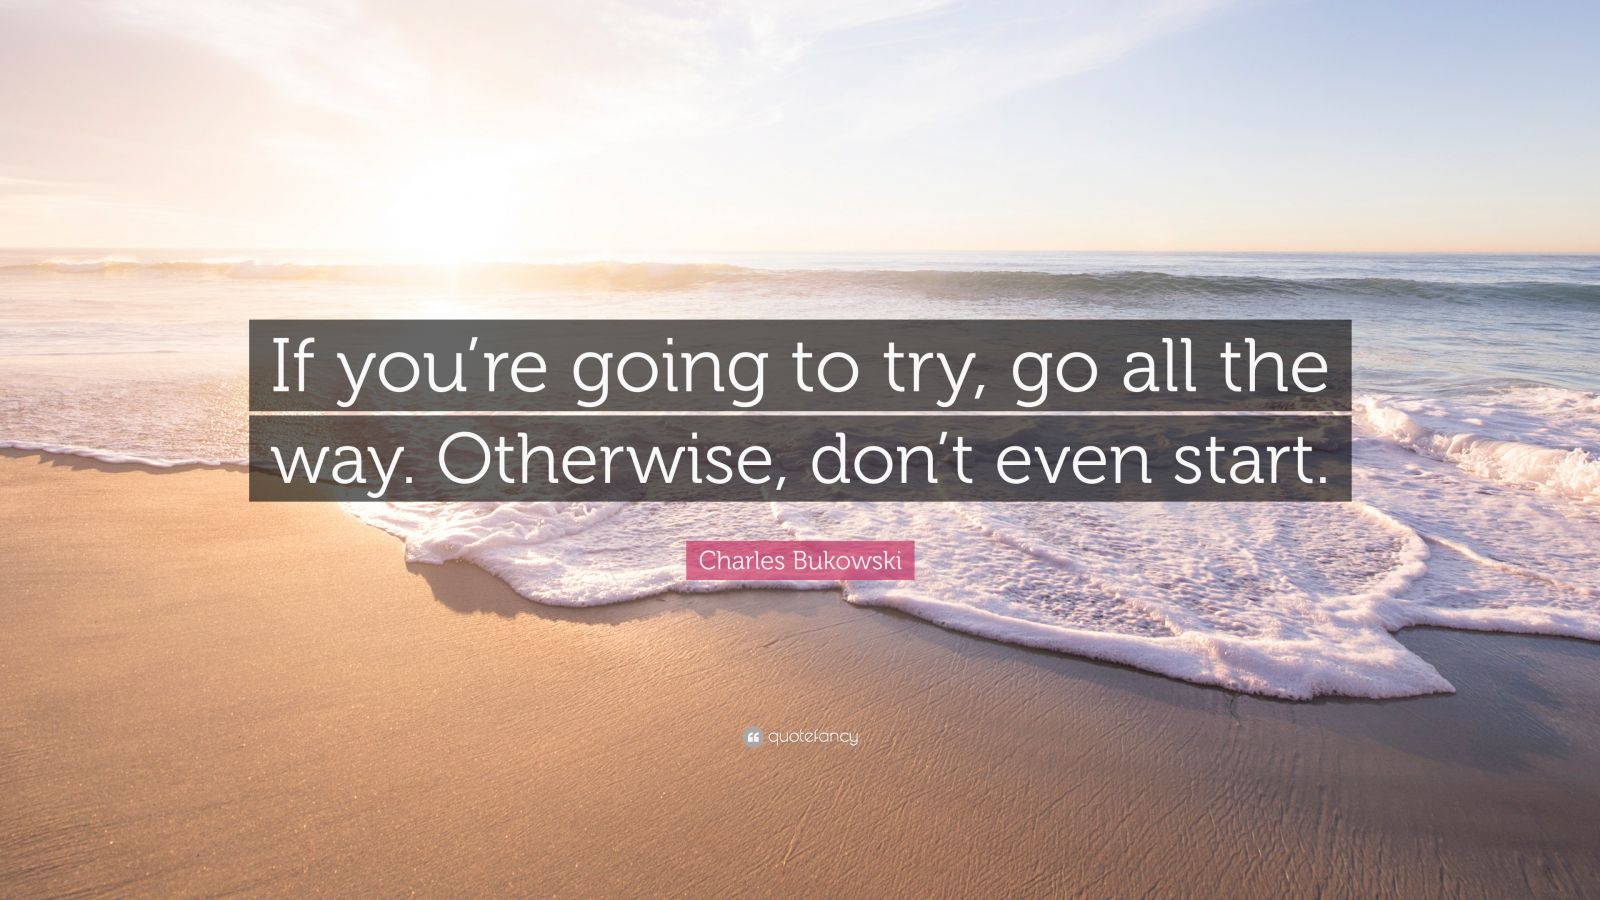 Charles Bukowski Quote: "If you're going to try, go all ...